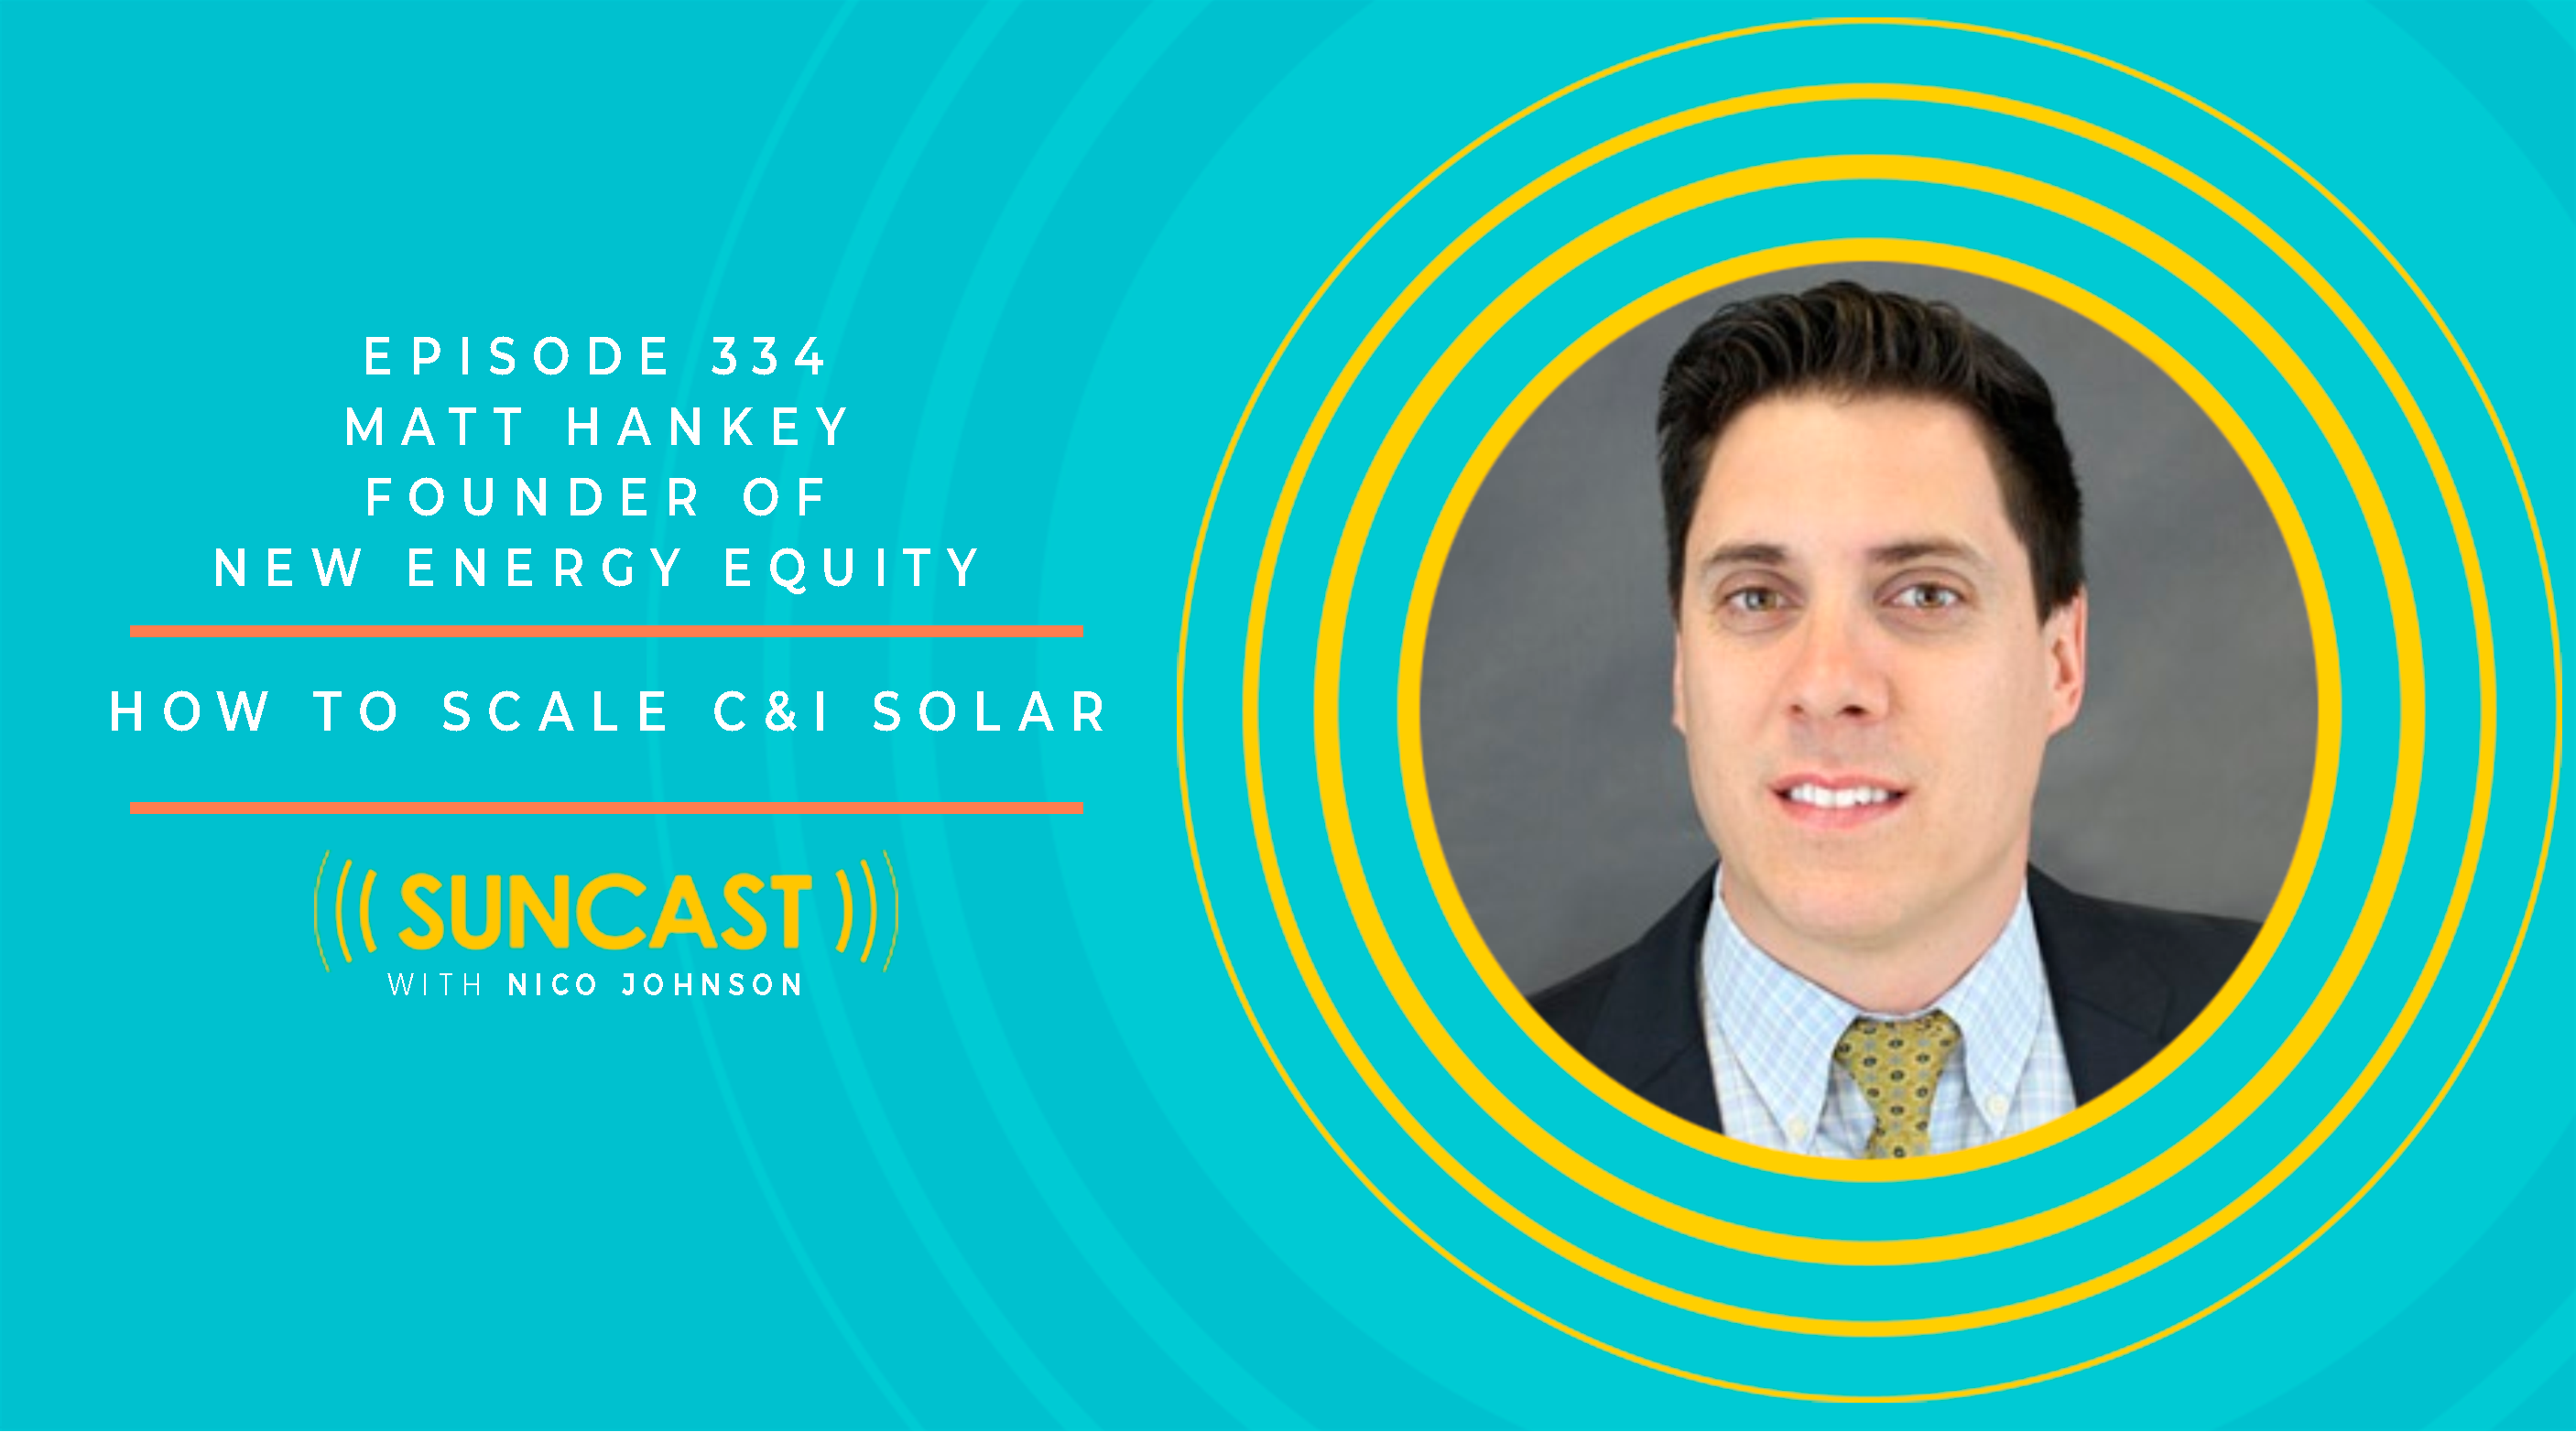 How to Scale C&I Solar Featuring New Energy Equity's CEO: Matt Hankey